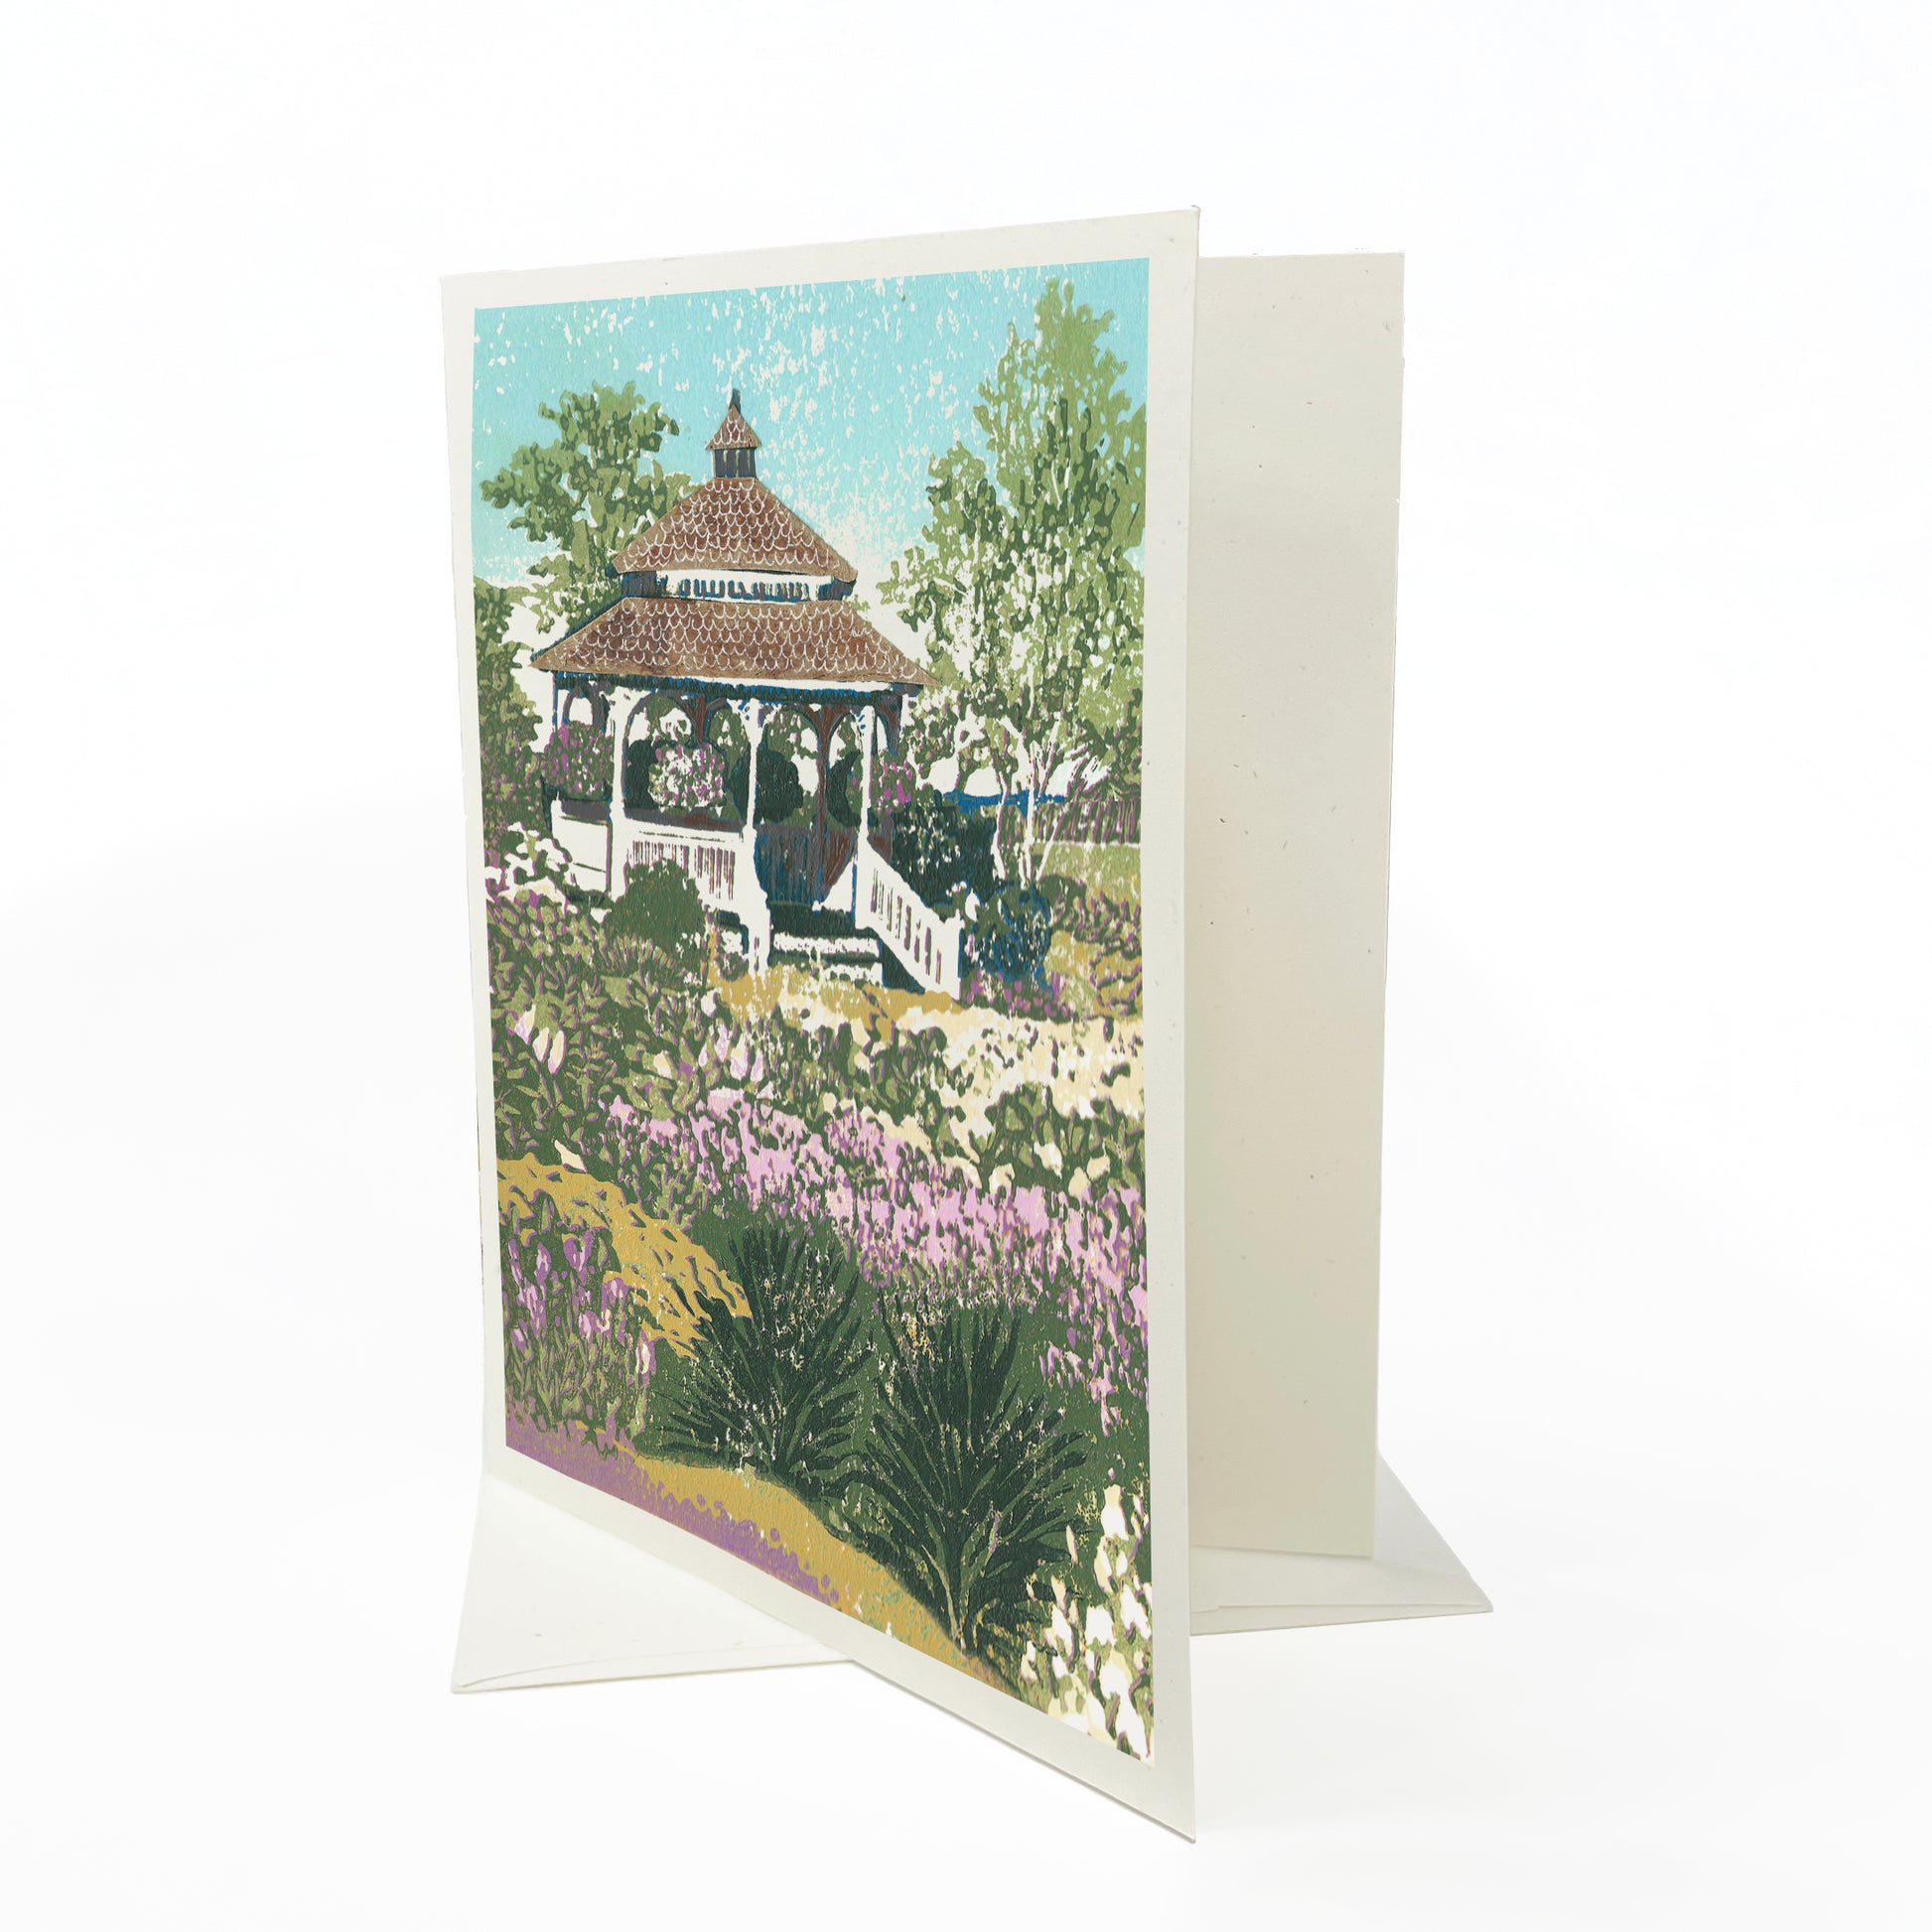 Mission Point Gazebo.  A casually elegant card featuring a digital reproduction of Natalia Wohletz’s Peninsula Prints block print design with the same title.